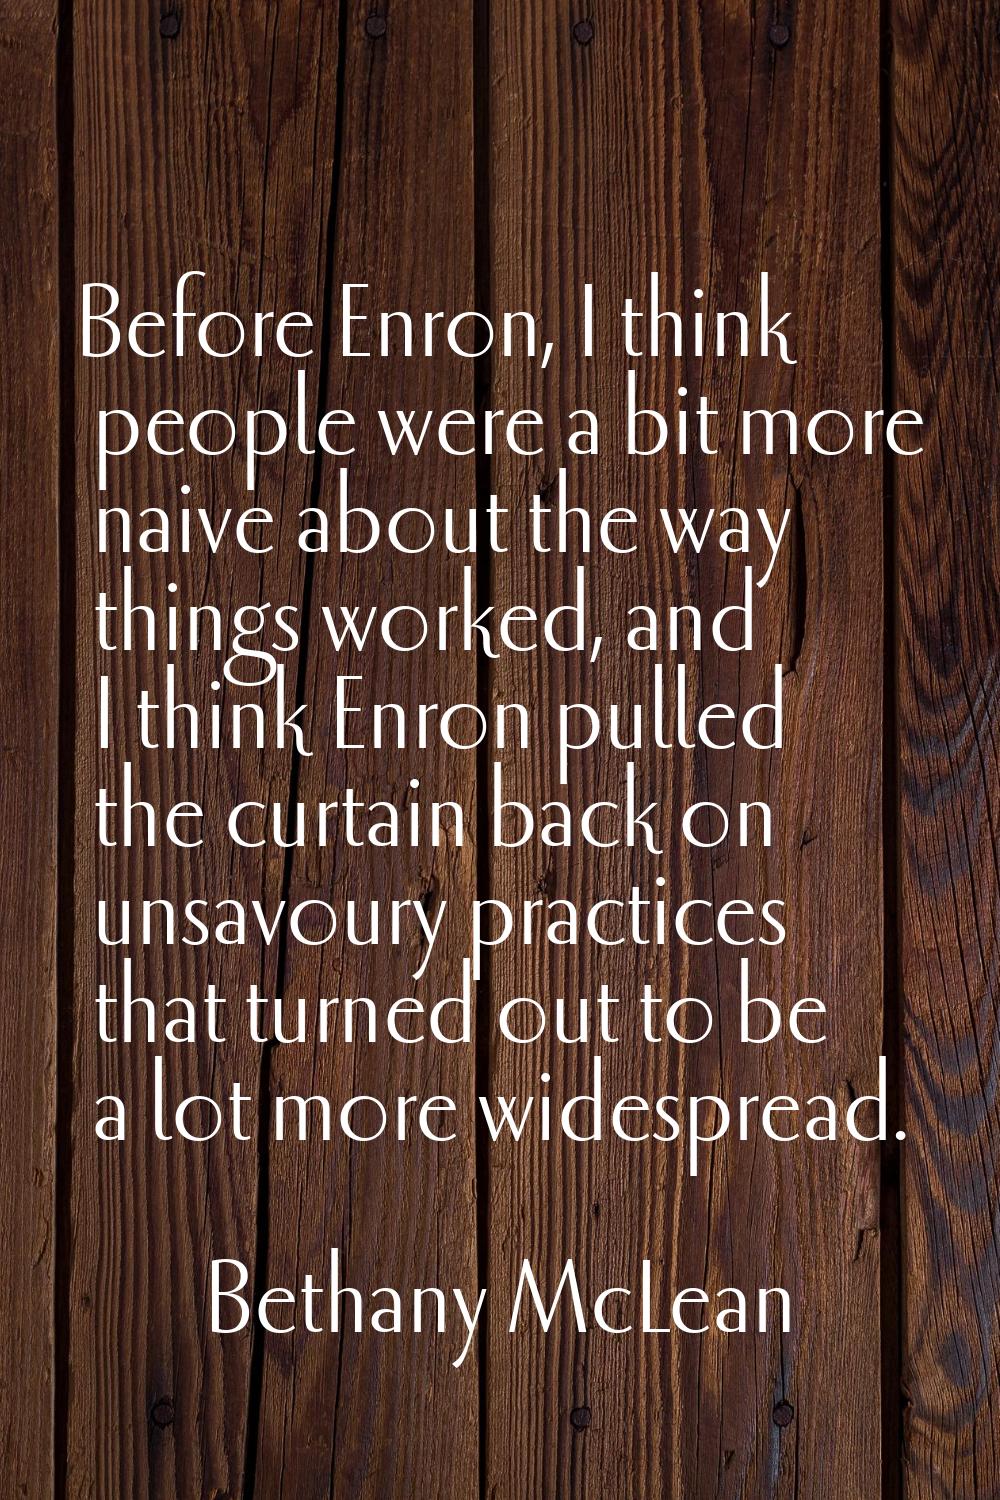 Before Enron, I think people were a bit more naive about the way things worked, and I think Enron p